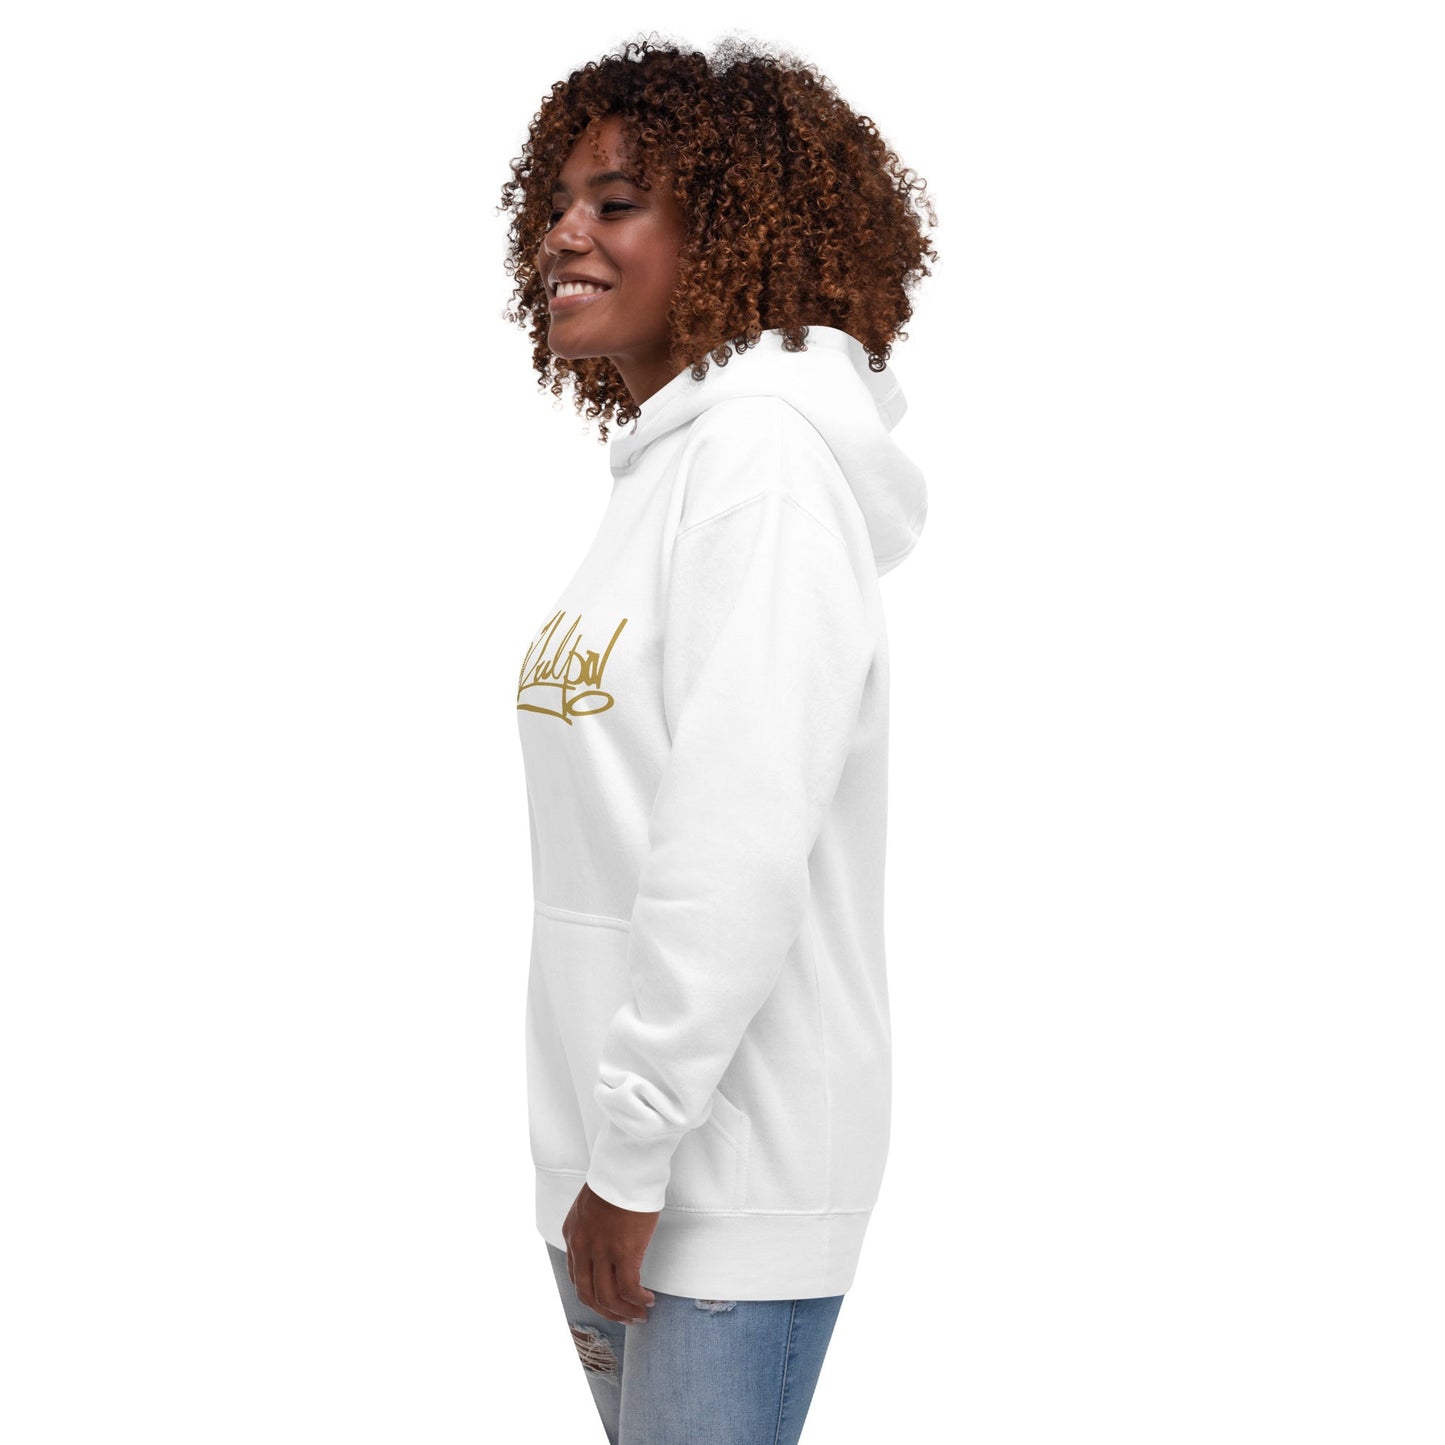 Introducing the MeaKulpa Premium Hoodie – where sophistication meets streetwear in a perfect harmony of style. With a white premium hoodie, meticulously crafted for those who appreciate the finer things in life. With a striking MeaKulpa print in matt gold adorns the front, adding a touch of opulence to your ensemble. The gold detailing captures the essence of exclusivity, making this hoodie a statement piece for those who seek a blend of luxury and urban flair.